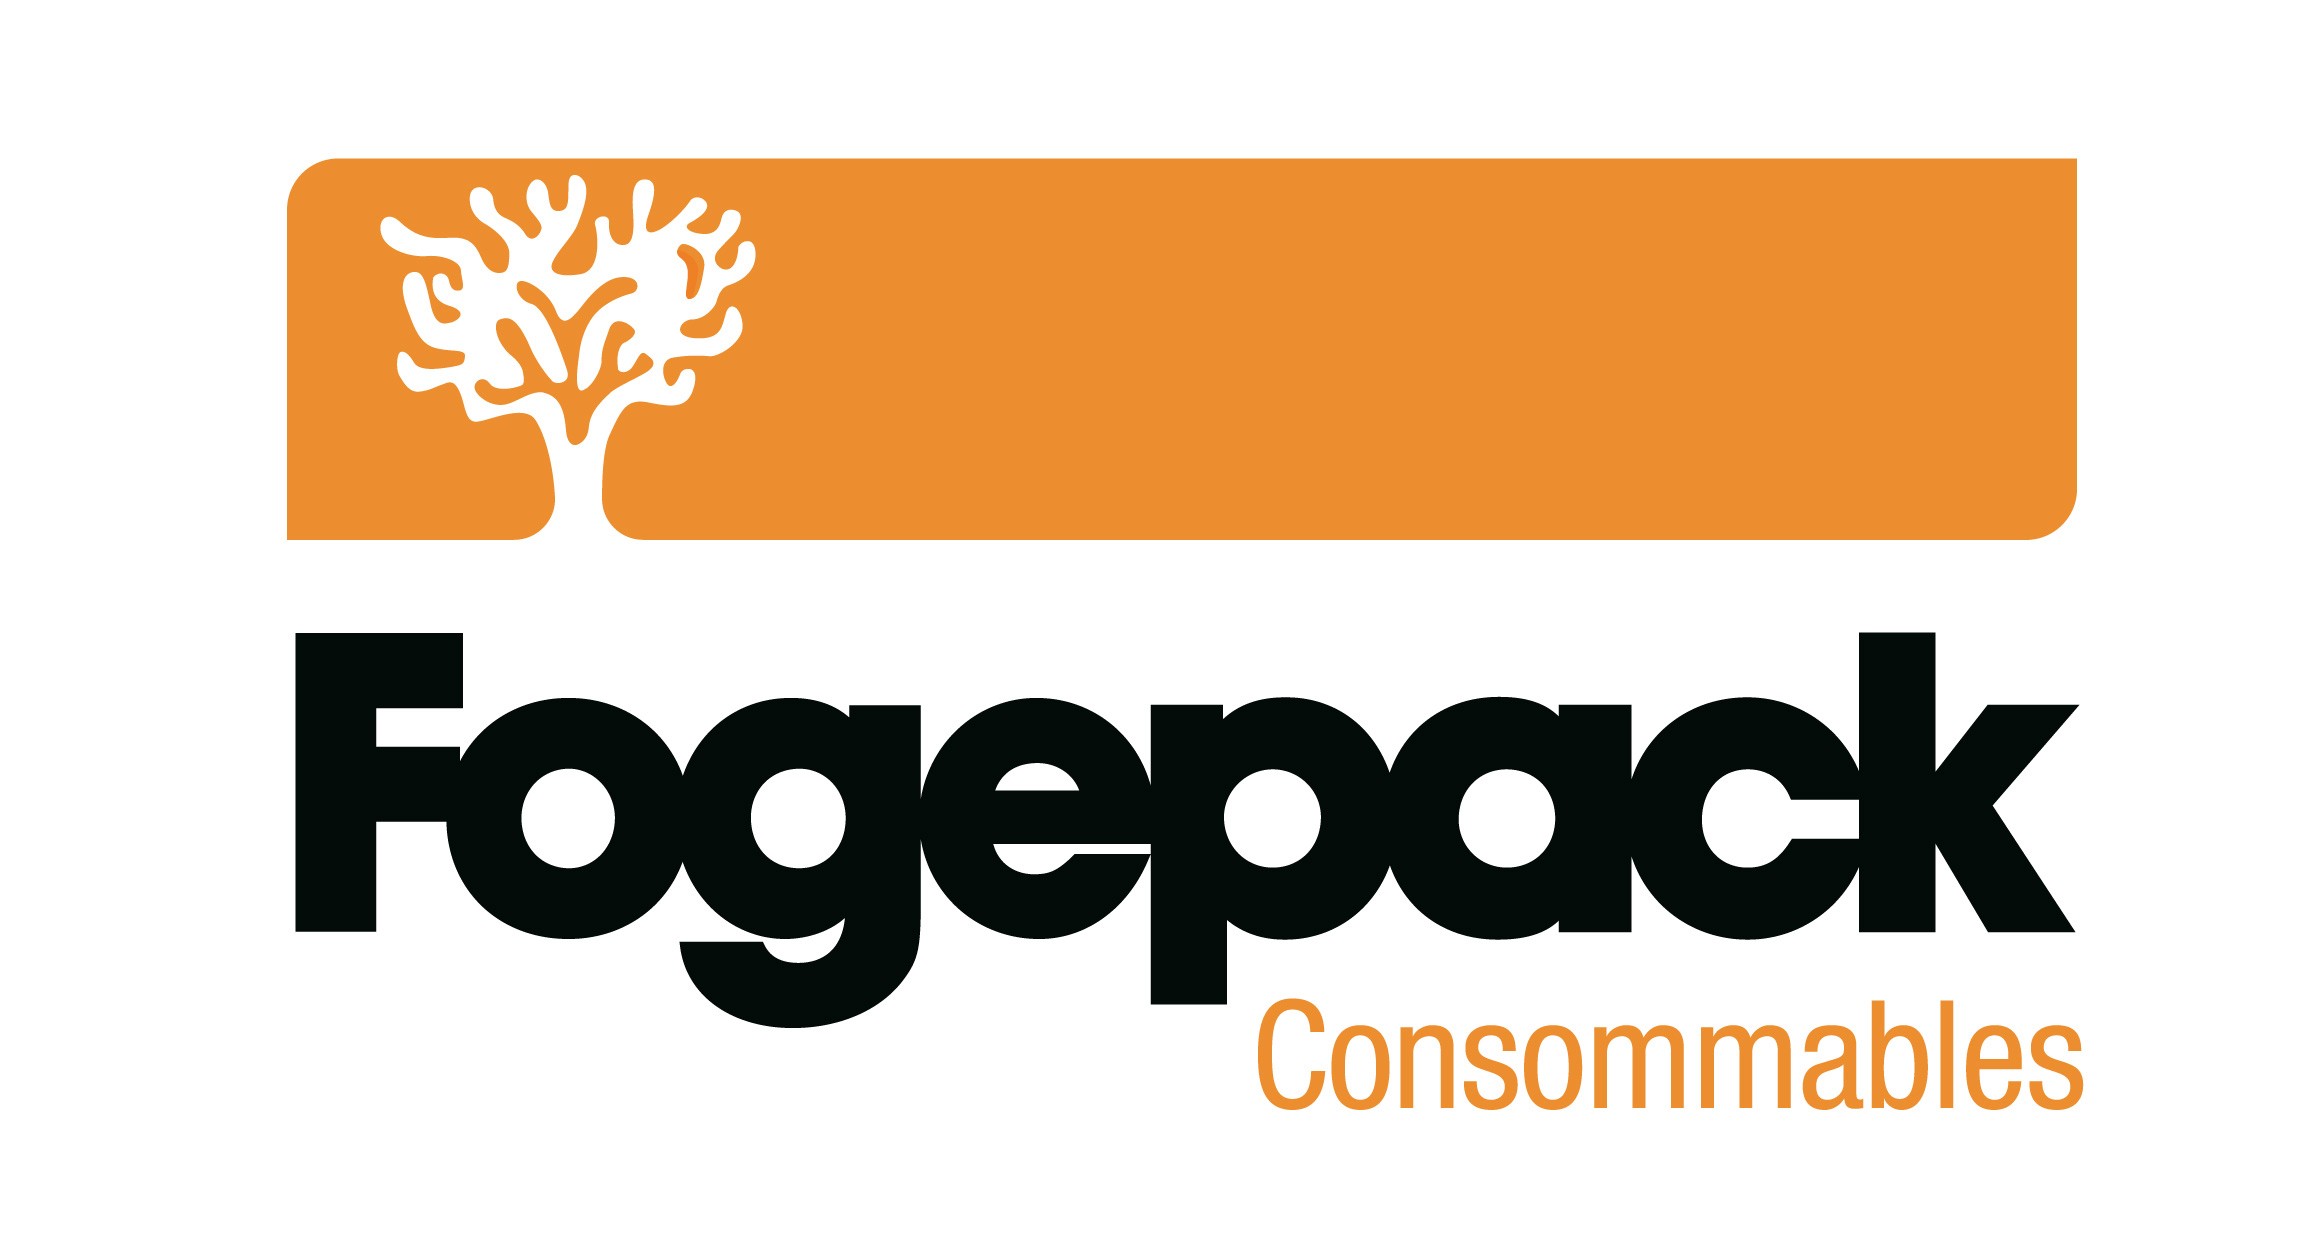 Fogepack consommables